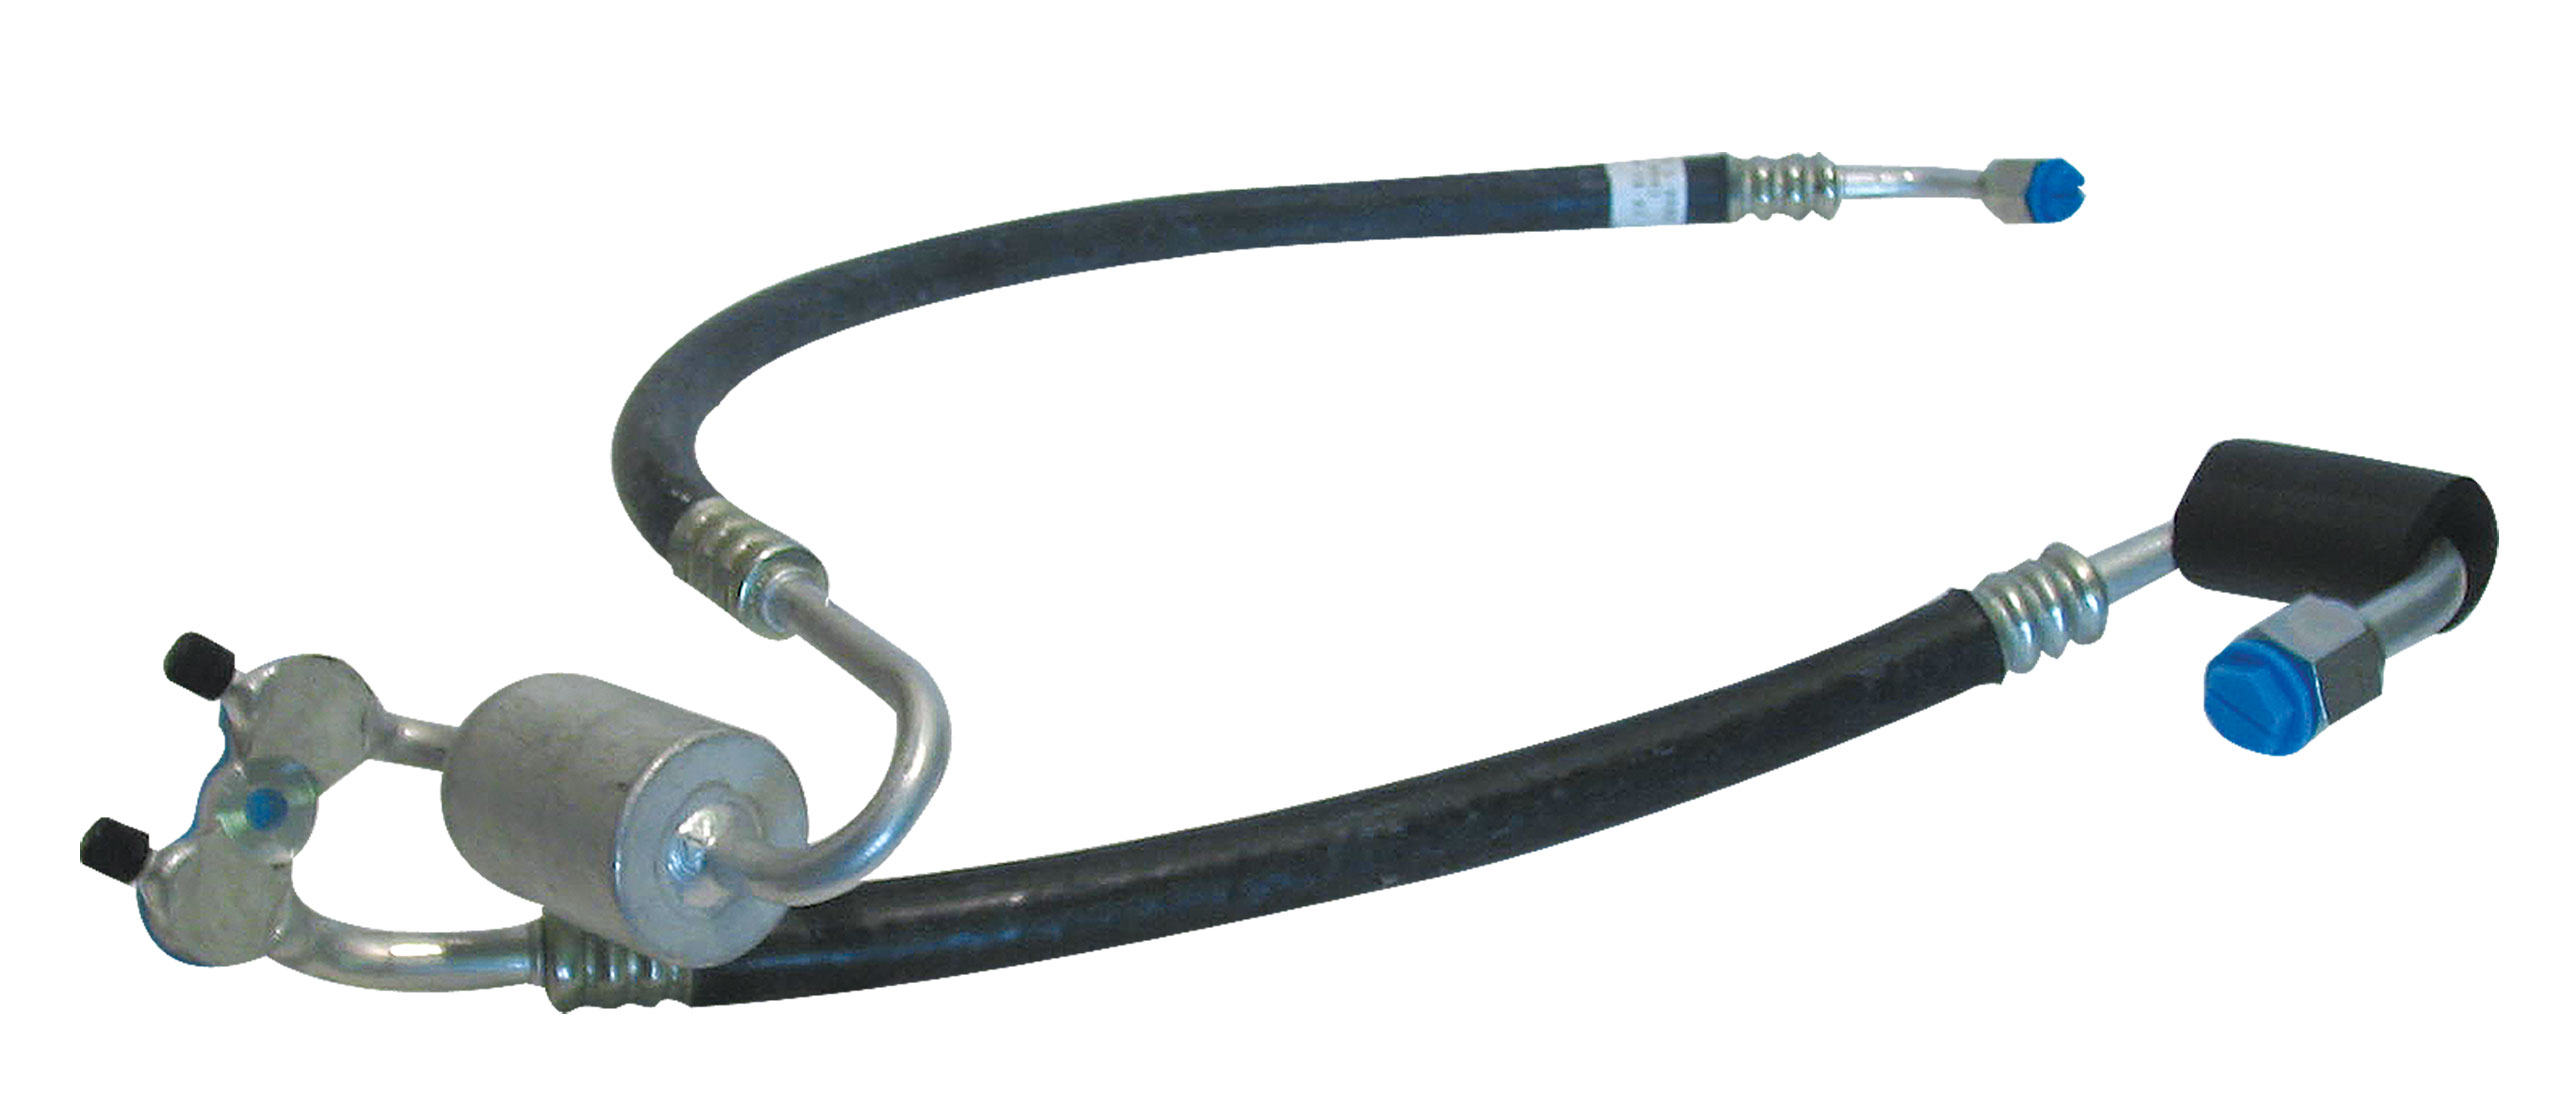 C3 1969-1972 Chevrolet Corvette Air Conditioning Main Compressor Hose. Small Block - Old Air Products